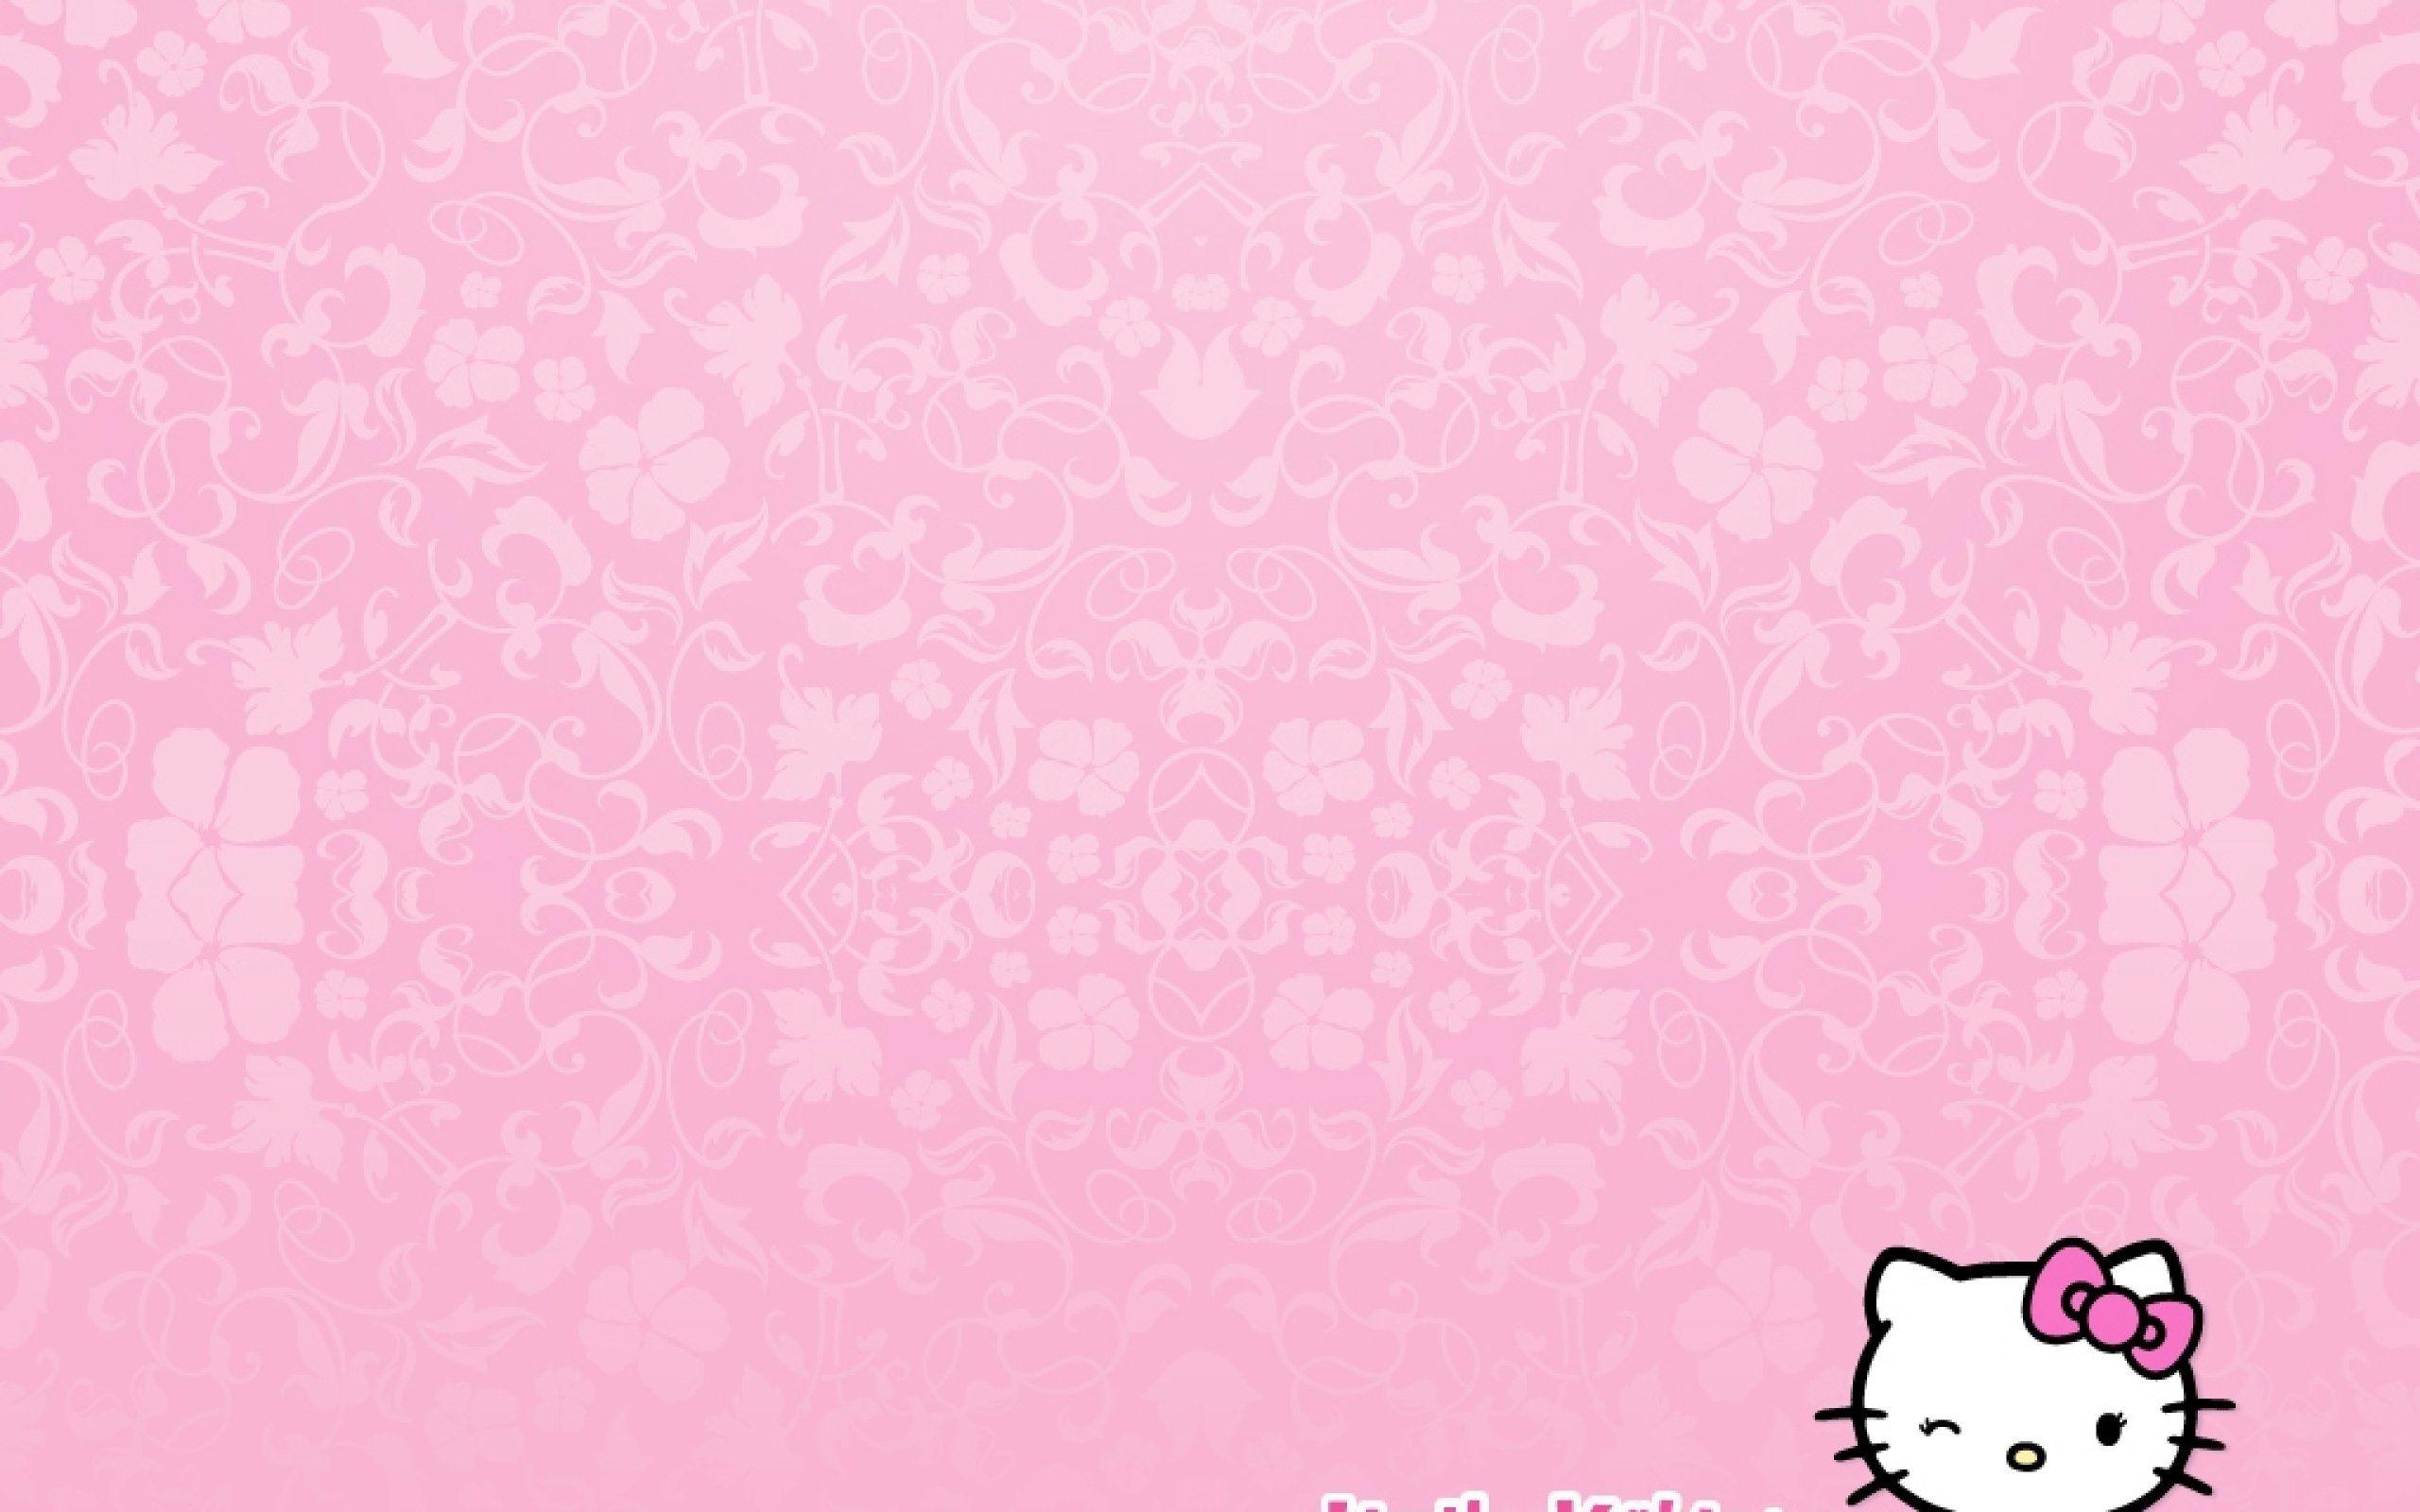 pink hello kitty background 4. Background Check All